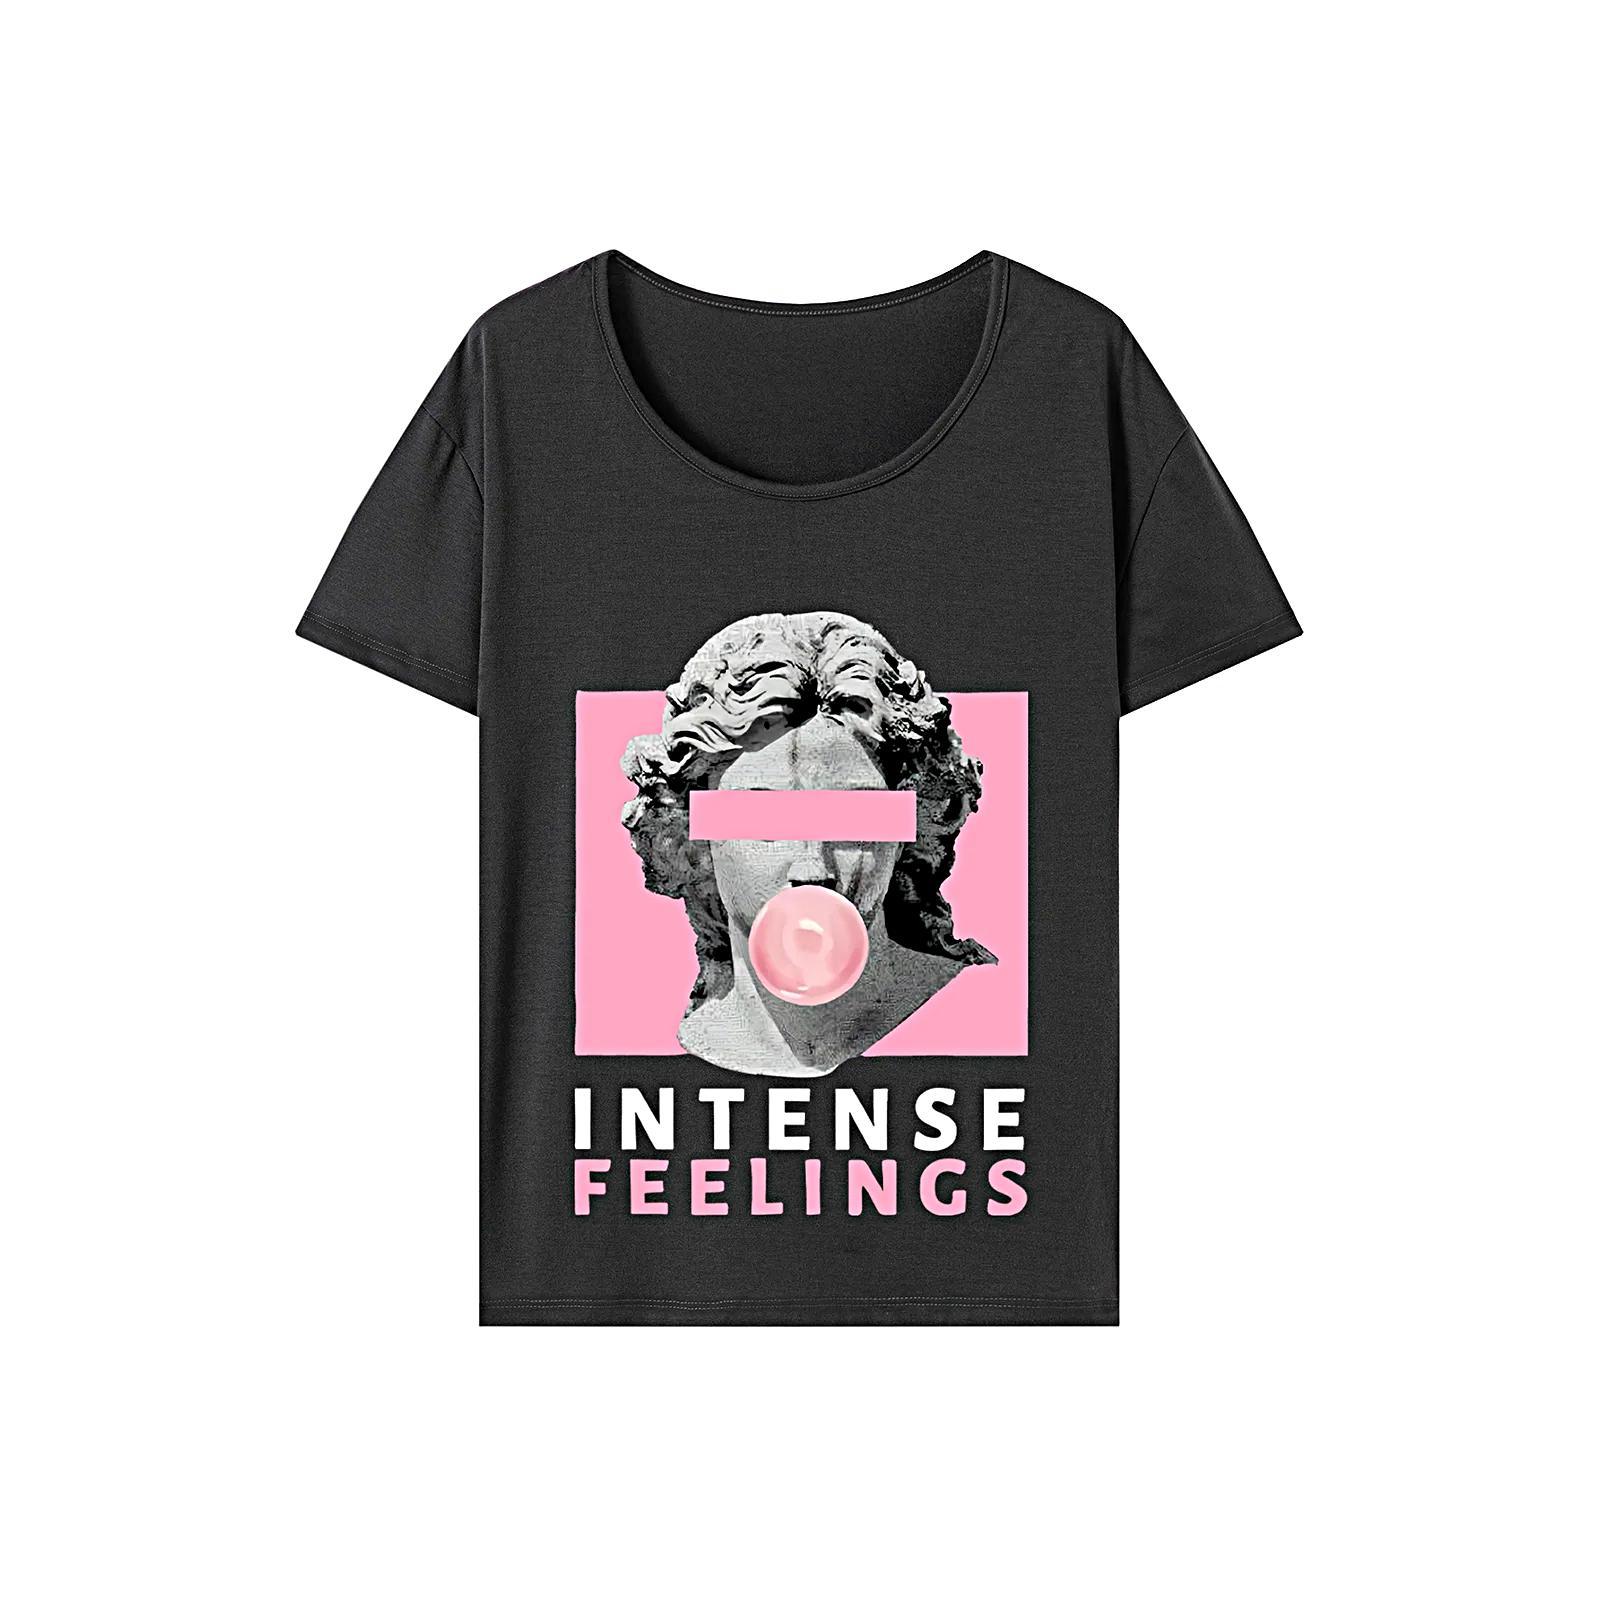 Womens T Shirt Summer Fashion Soft Crew Neck Tee for Vacation Commuting Work L